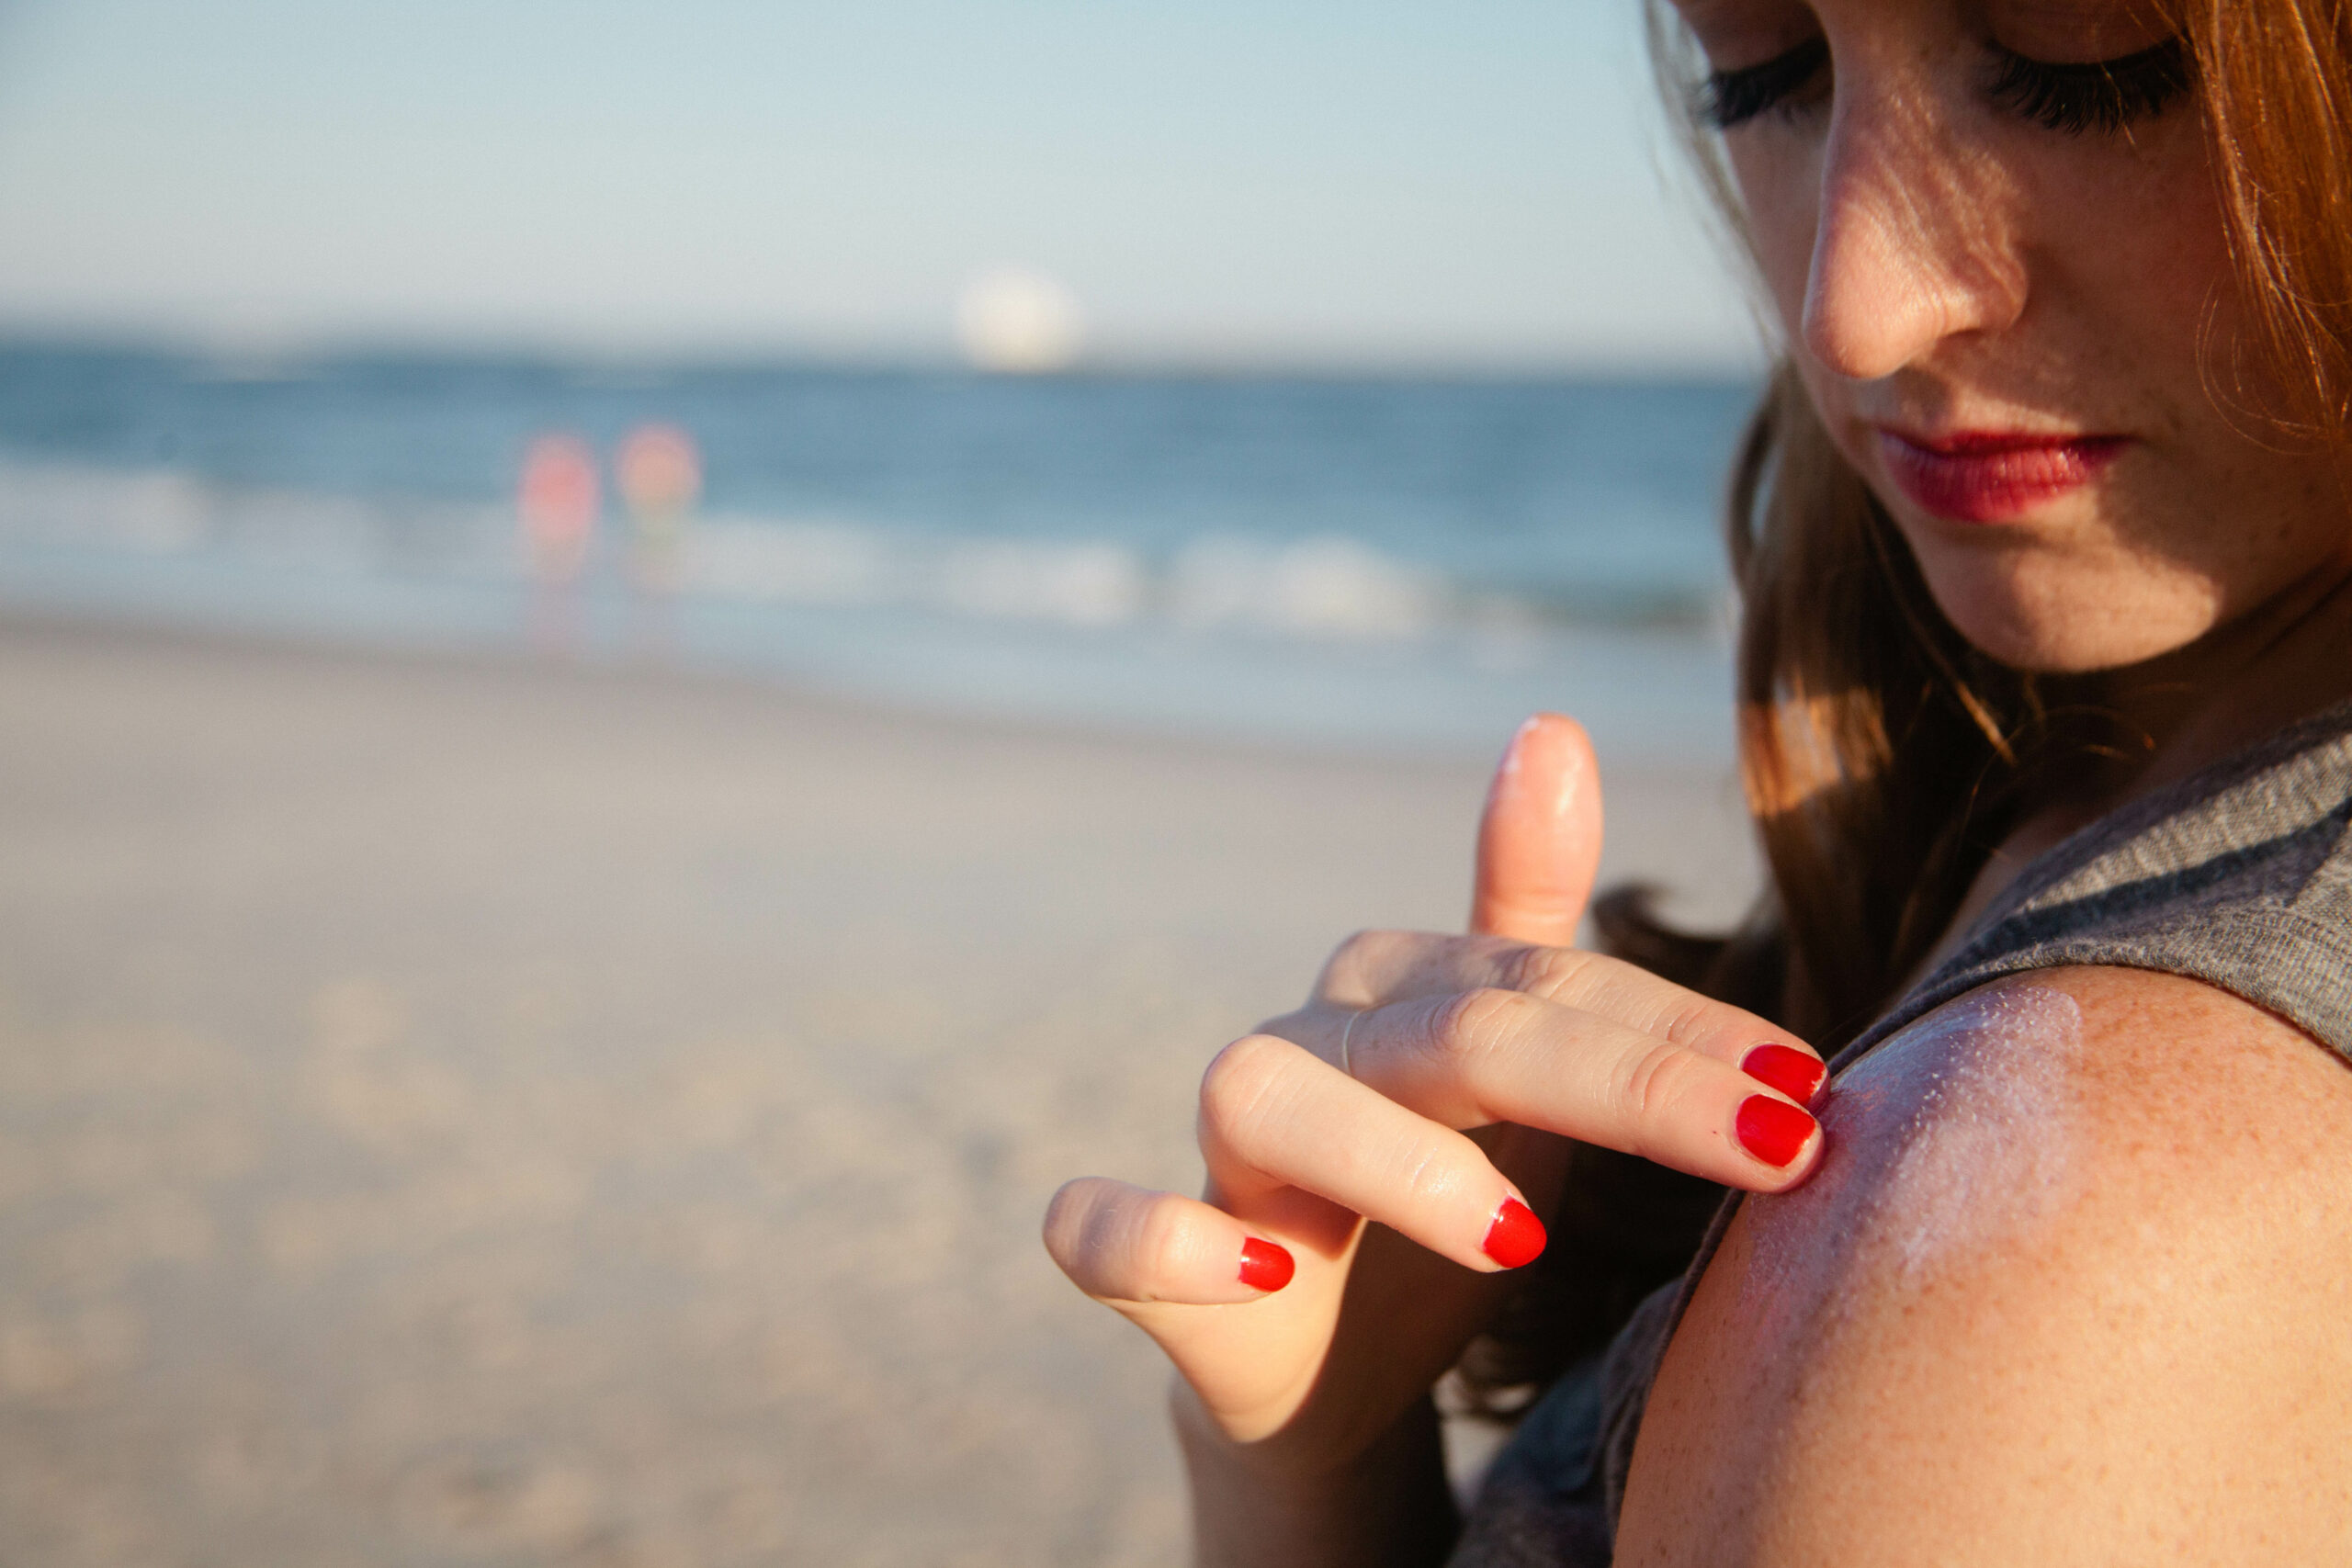 6 Important Things For Redheads To Consider When Buying Sunscreen